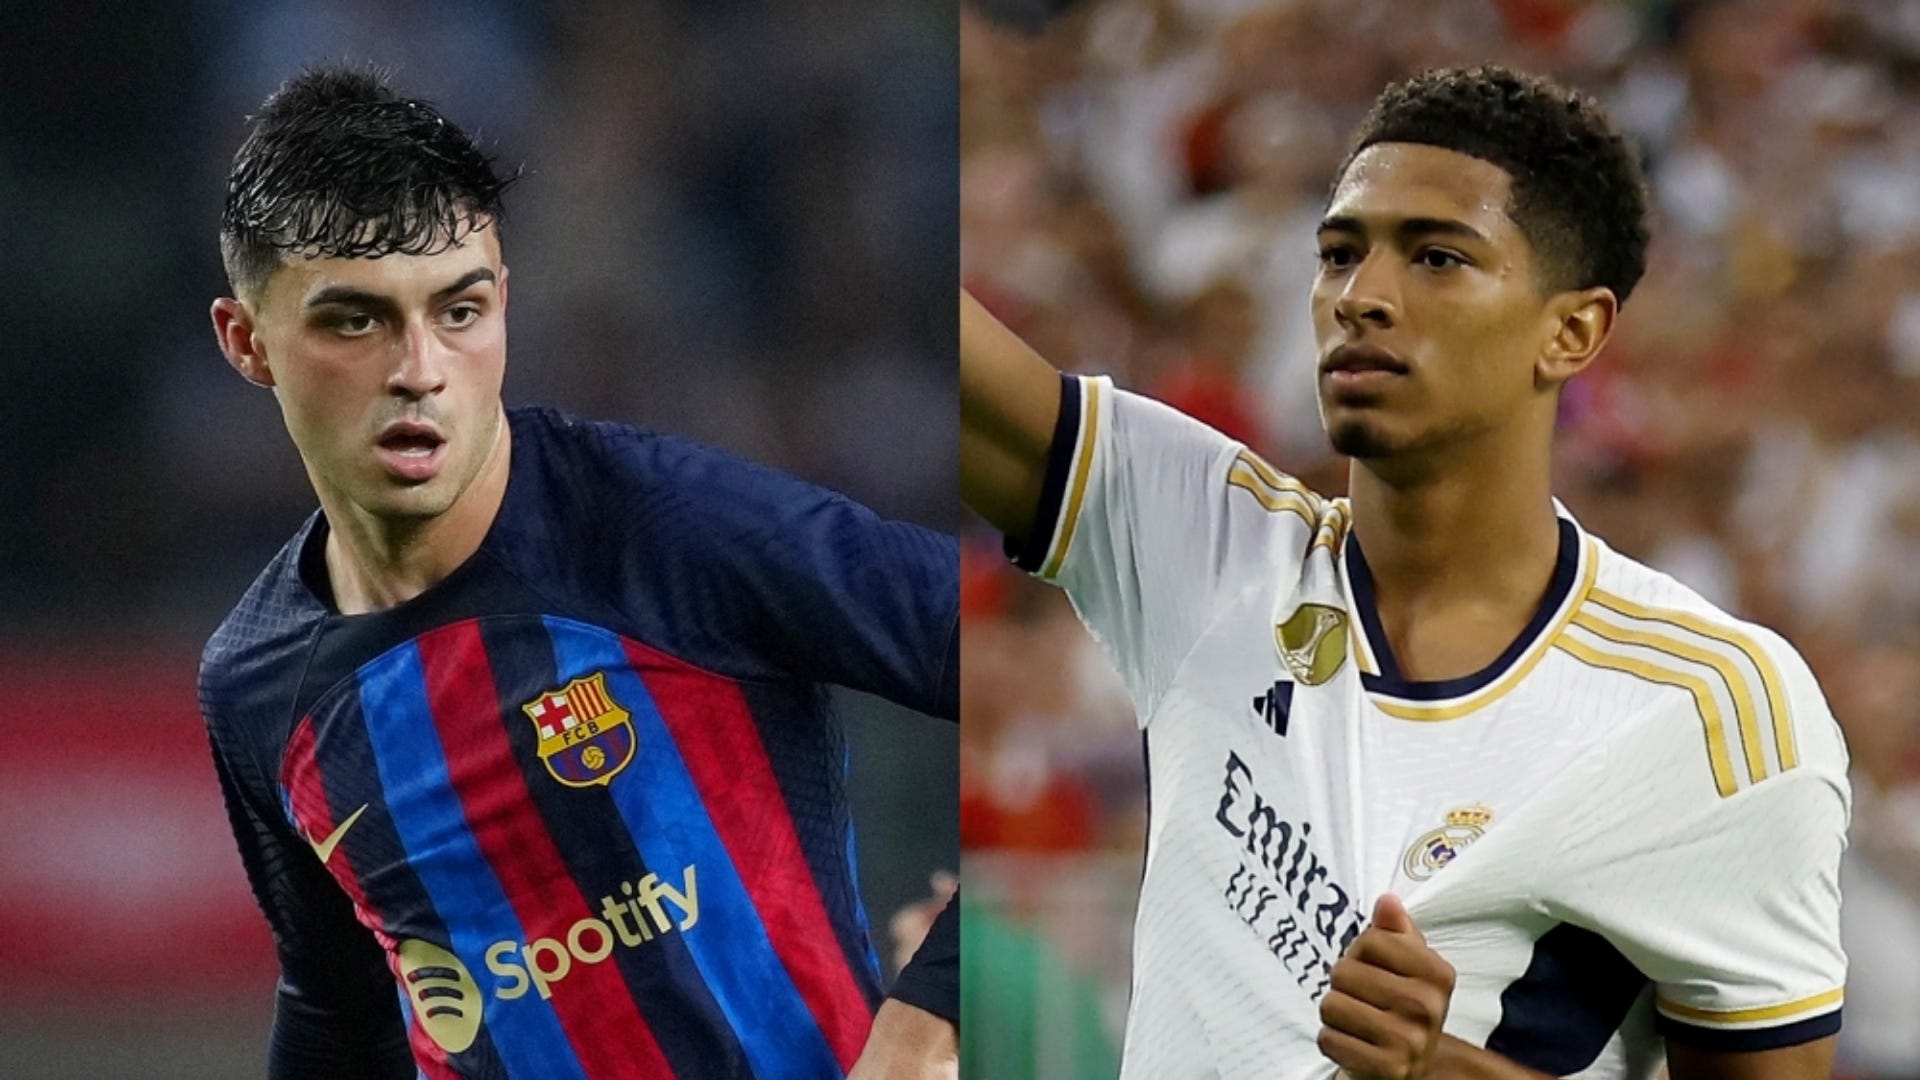 Barcelona vs Real Madrid Live stream, TV channel, kick-off time and where to watch Goal UK